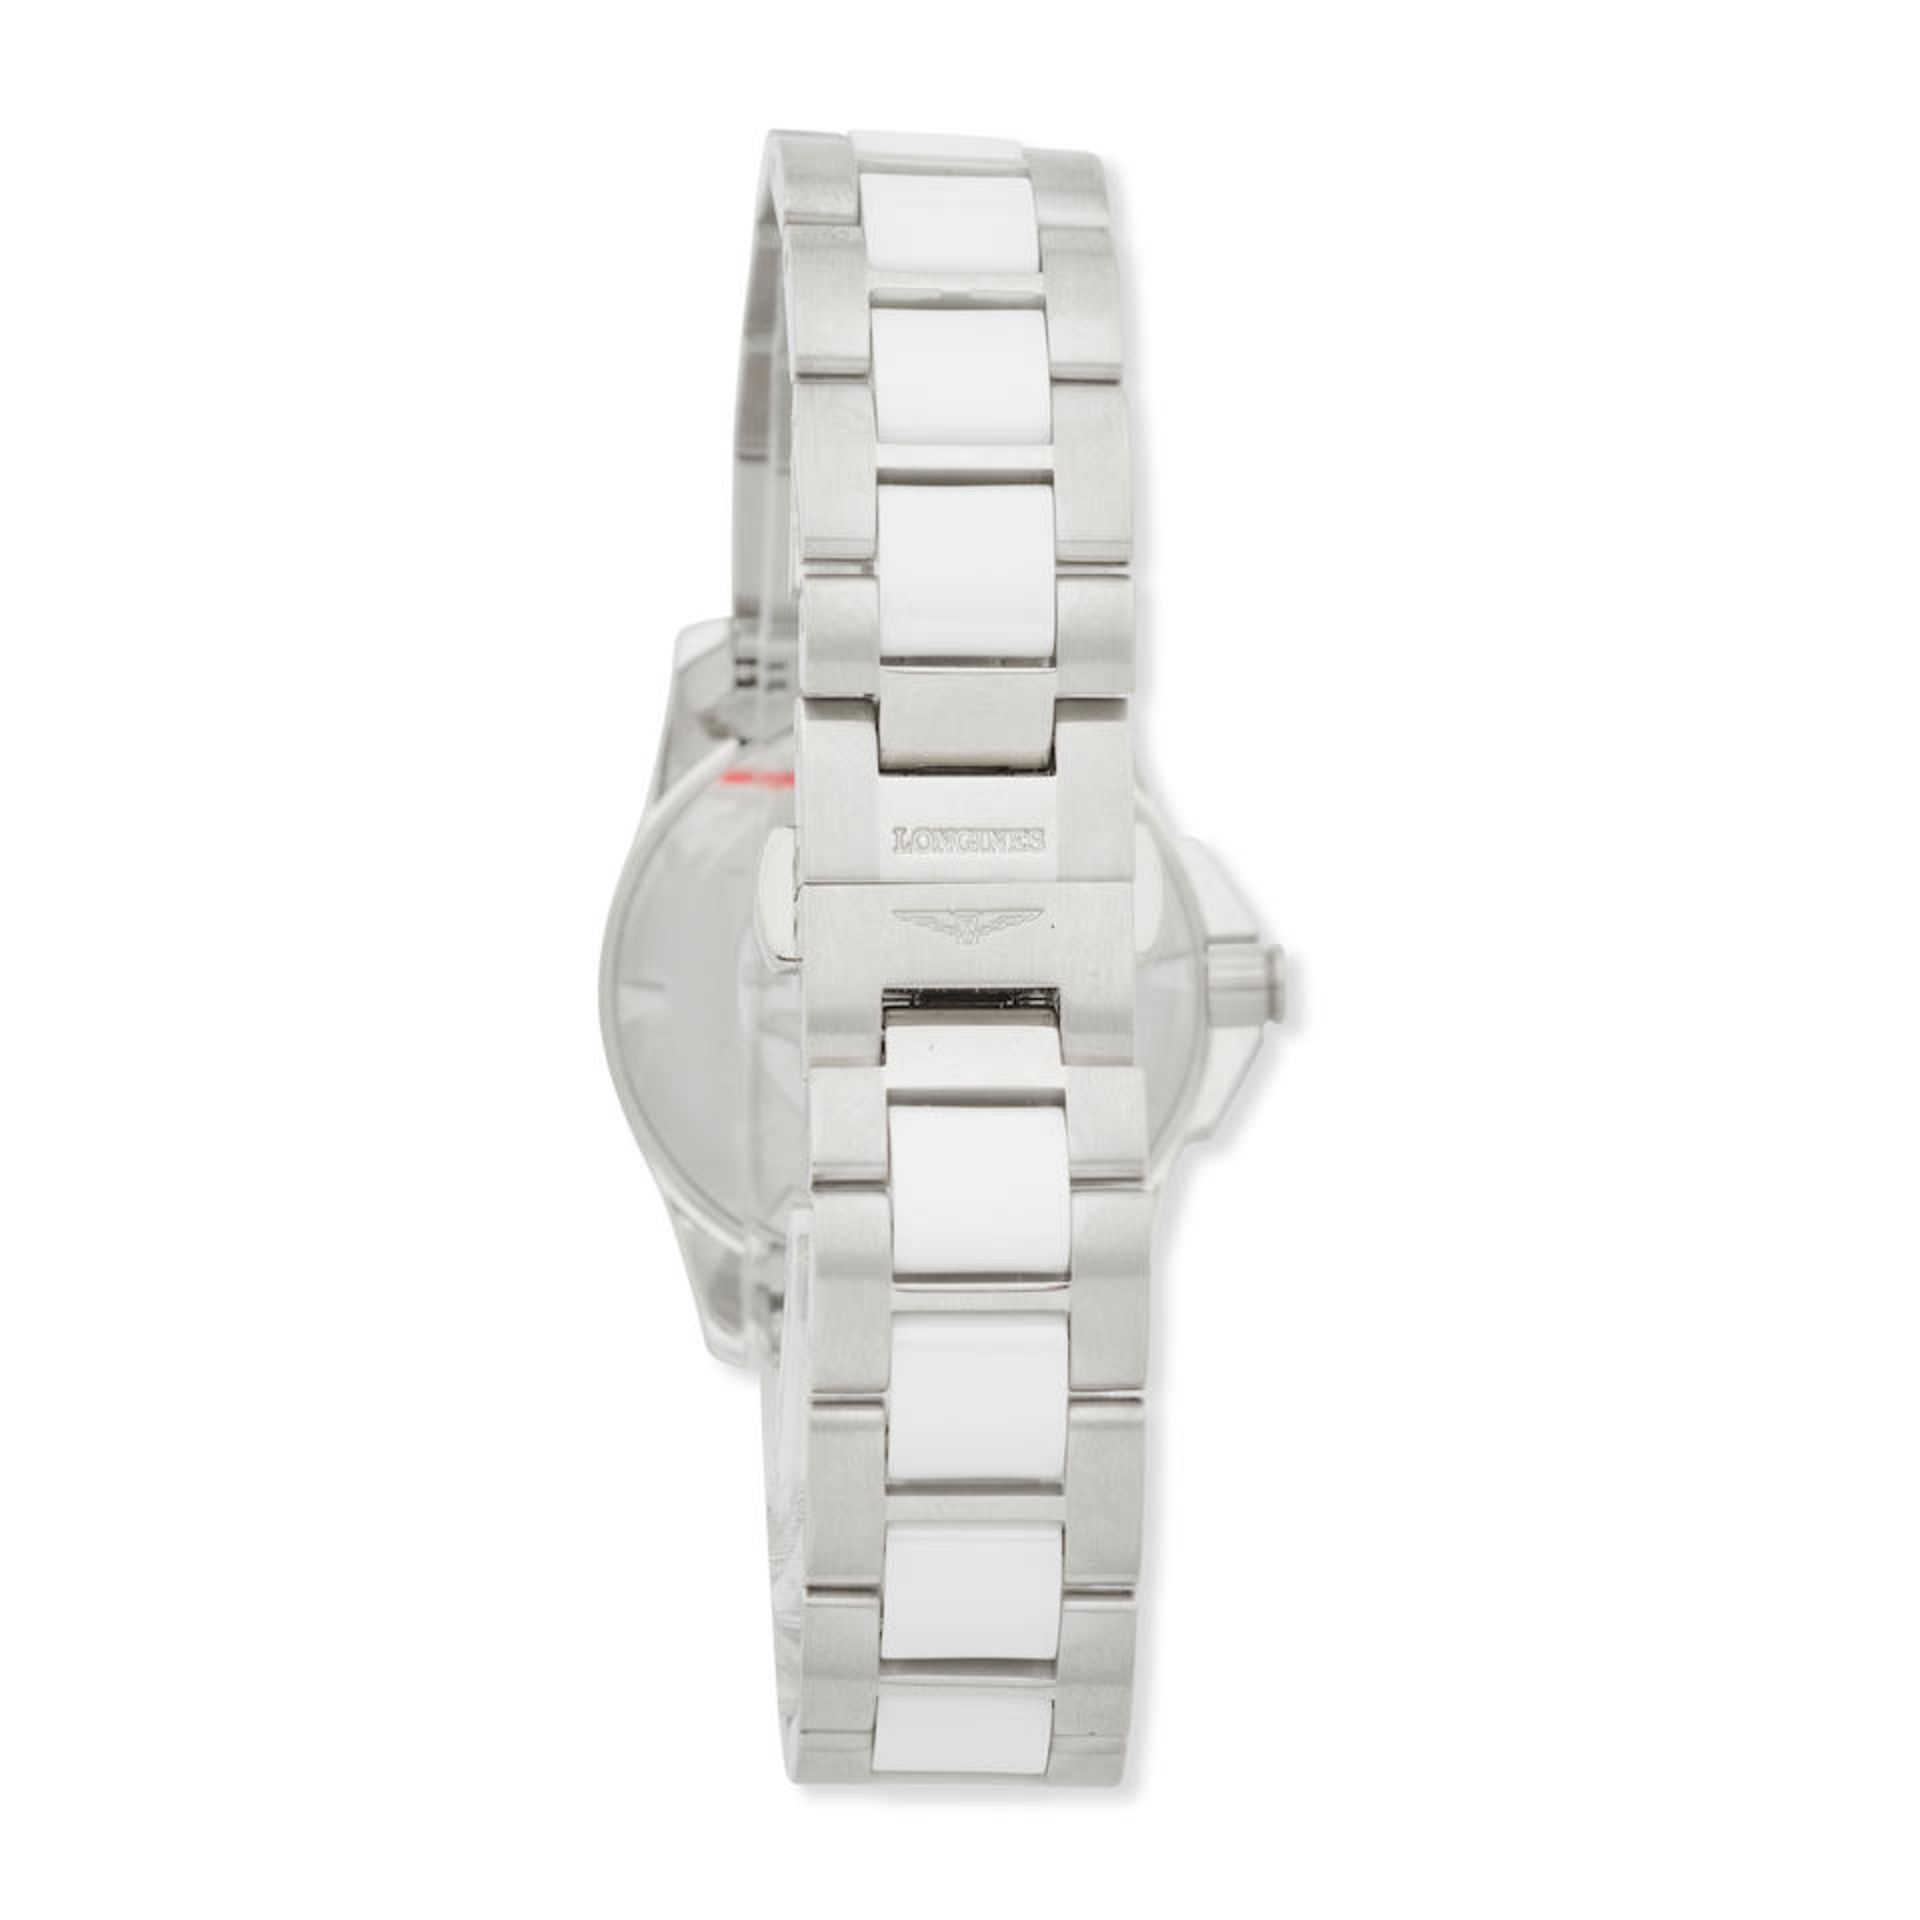 Longines. A lady's stainless steel and white ceramic quartz calendar bracelet watch Conquest, R... - Image 4 of 4